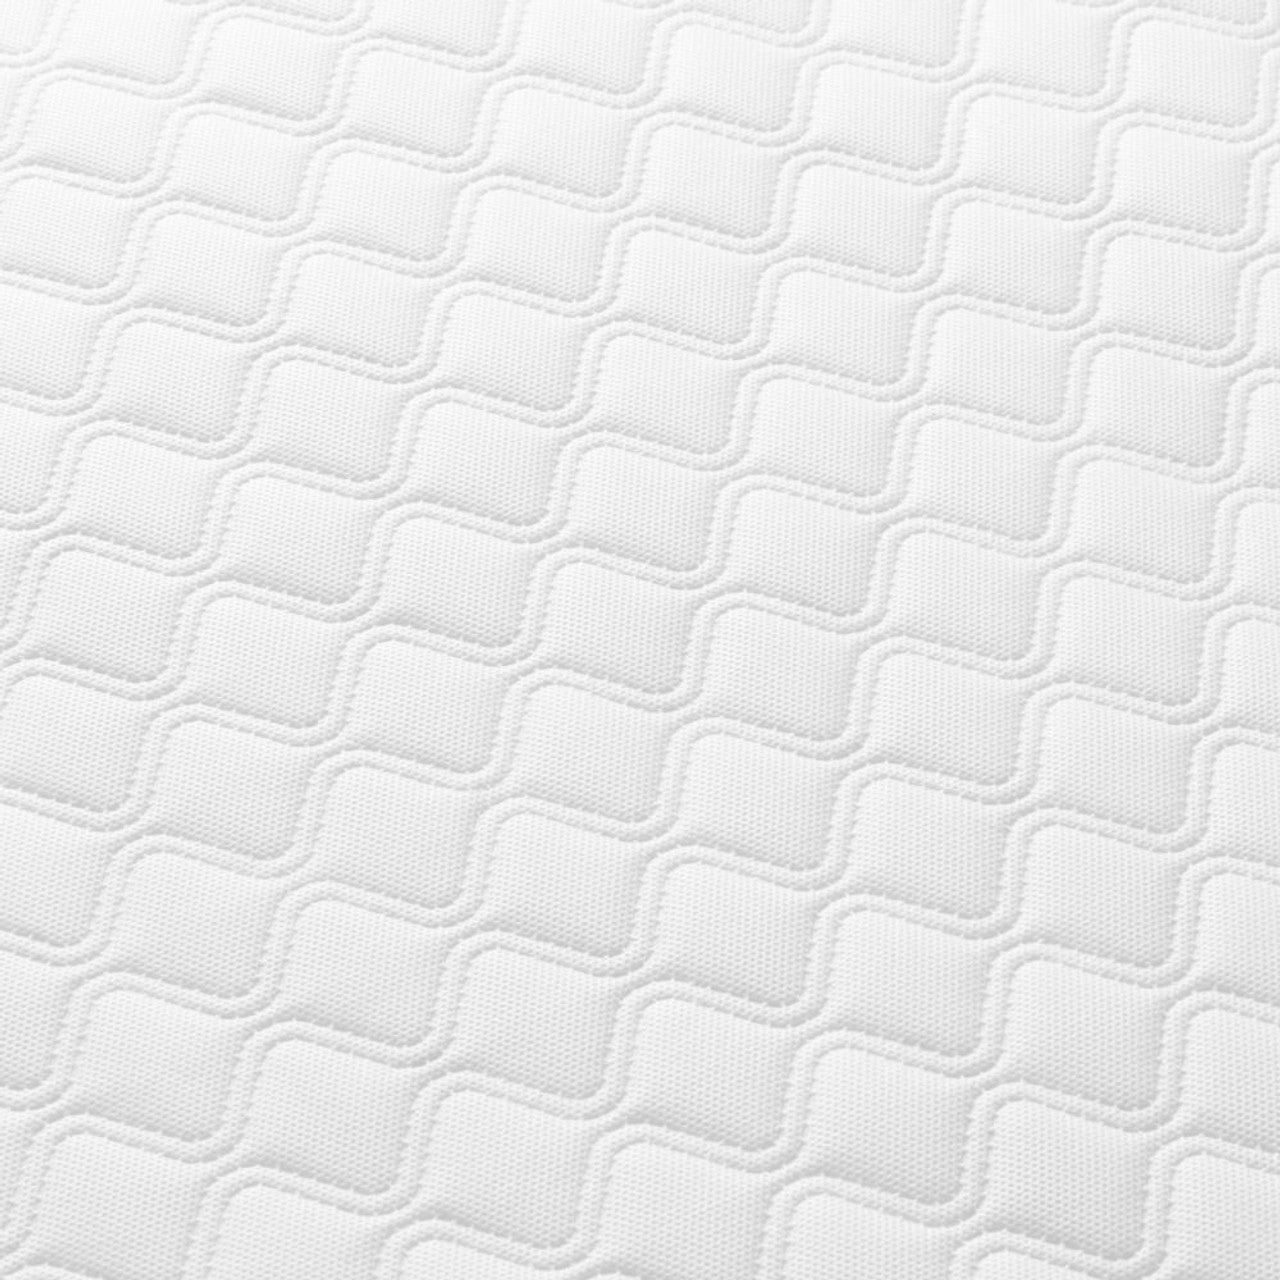 Tutti Bambini Sprung Cot Bed Mattress (70 x 140 cm) - For Your Little One